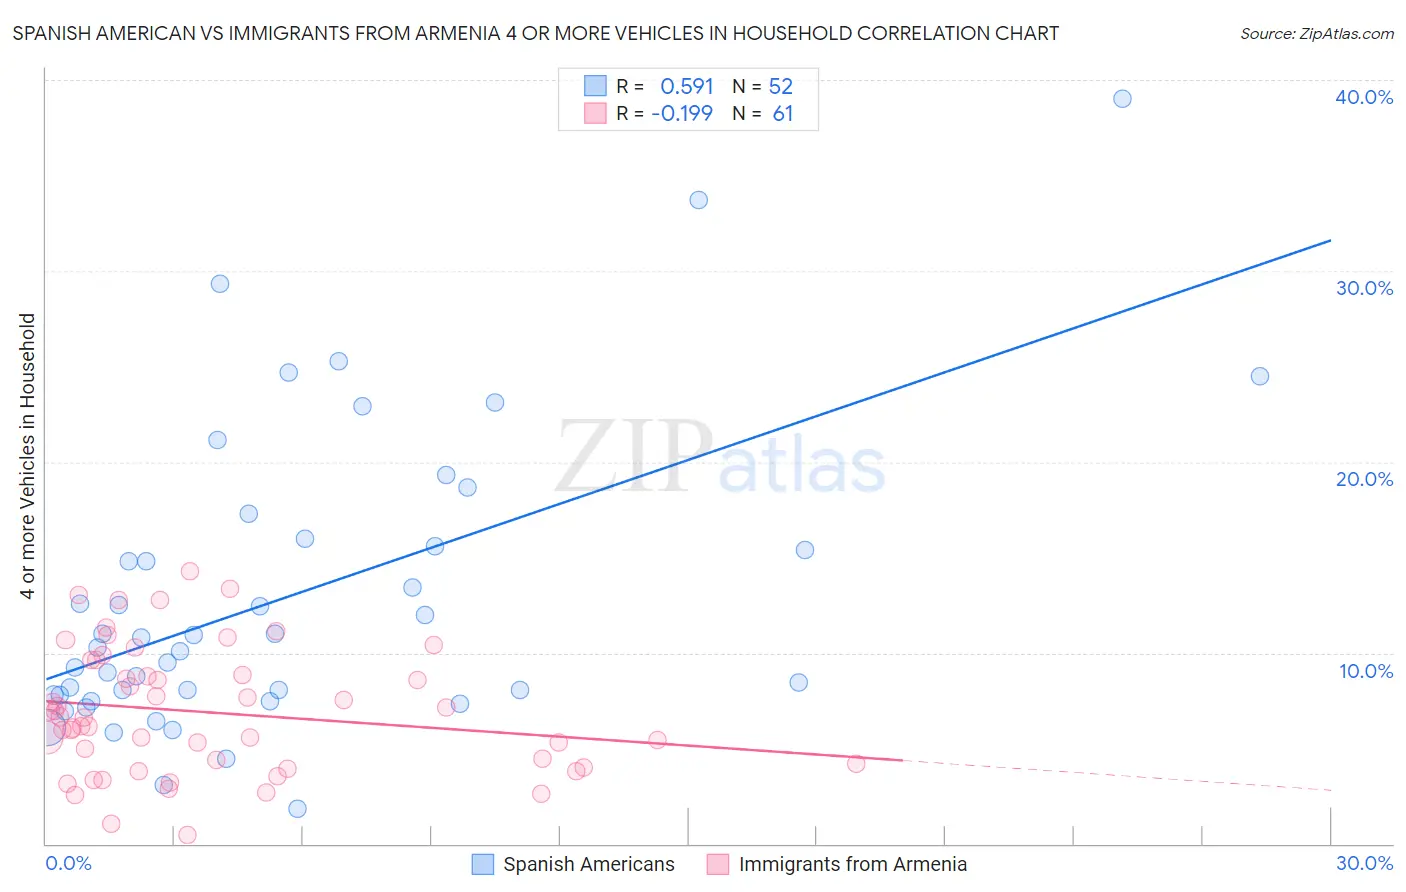 Spanish American vs Immigrants from Armenia 4 or more Vehicles in Household